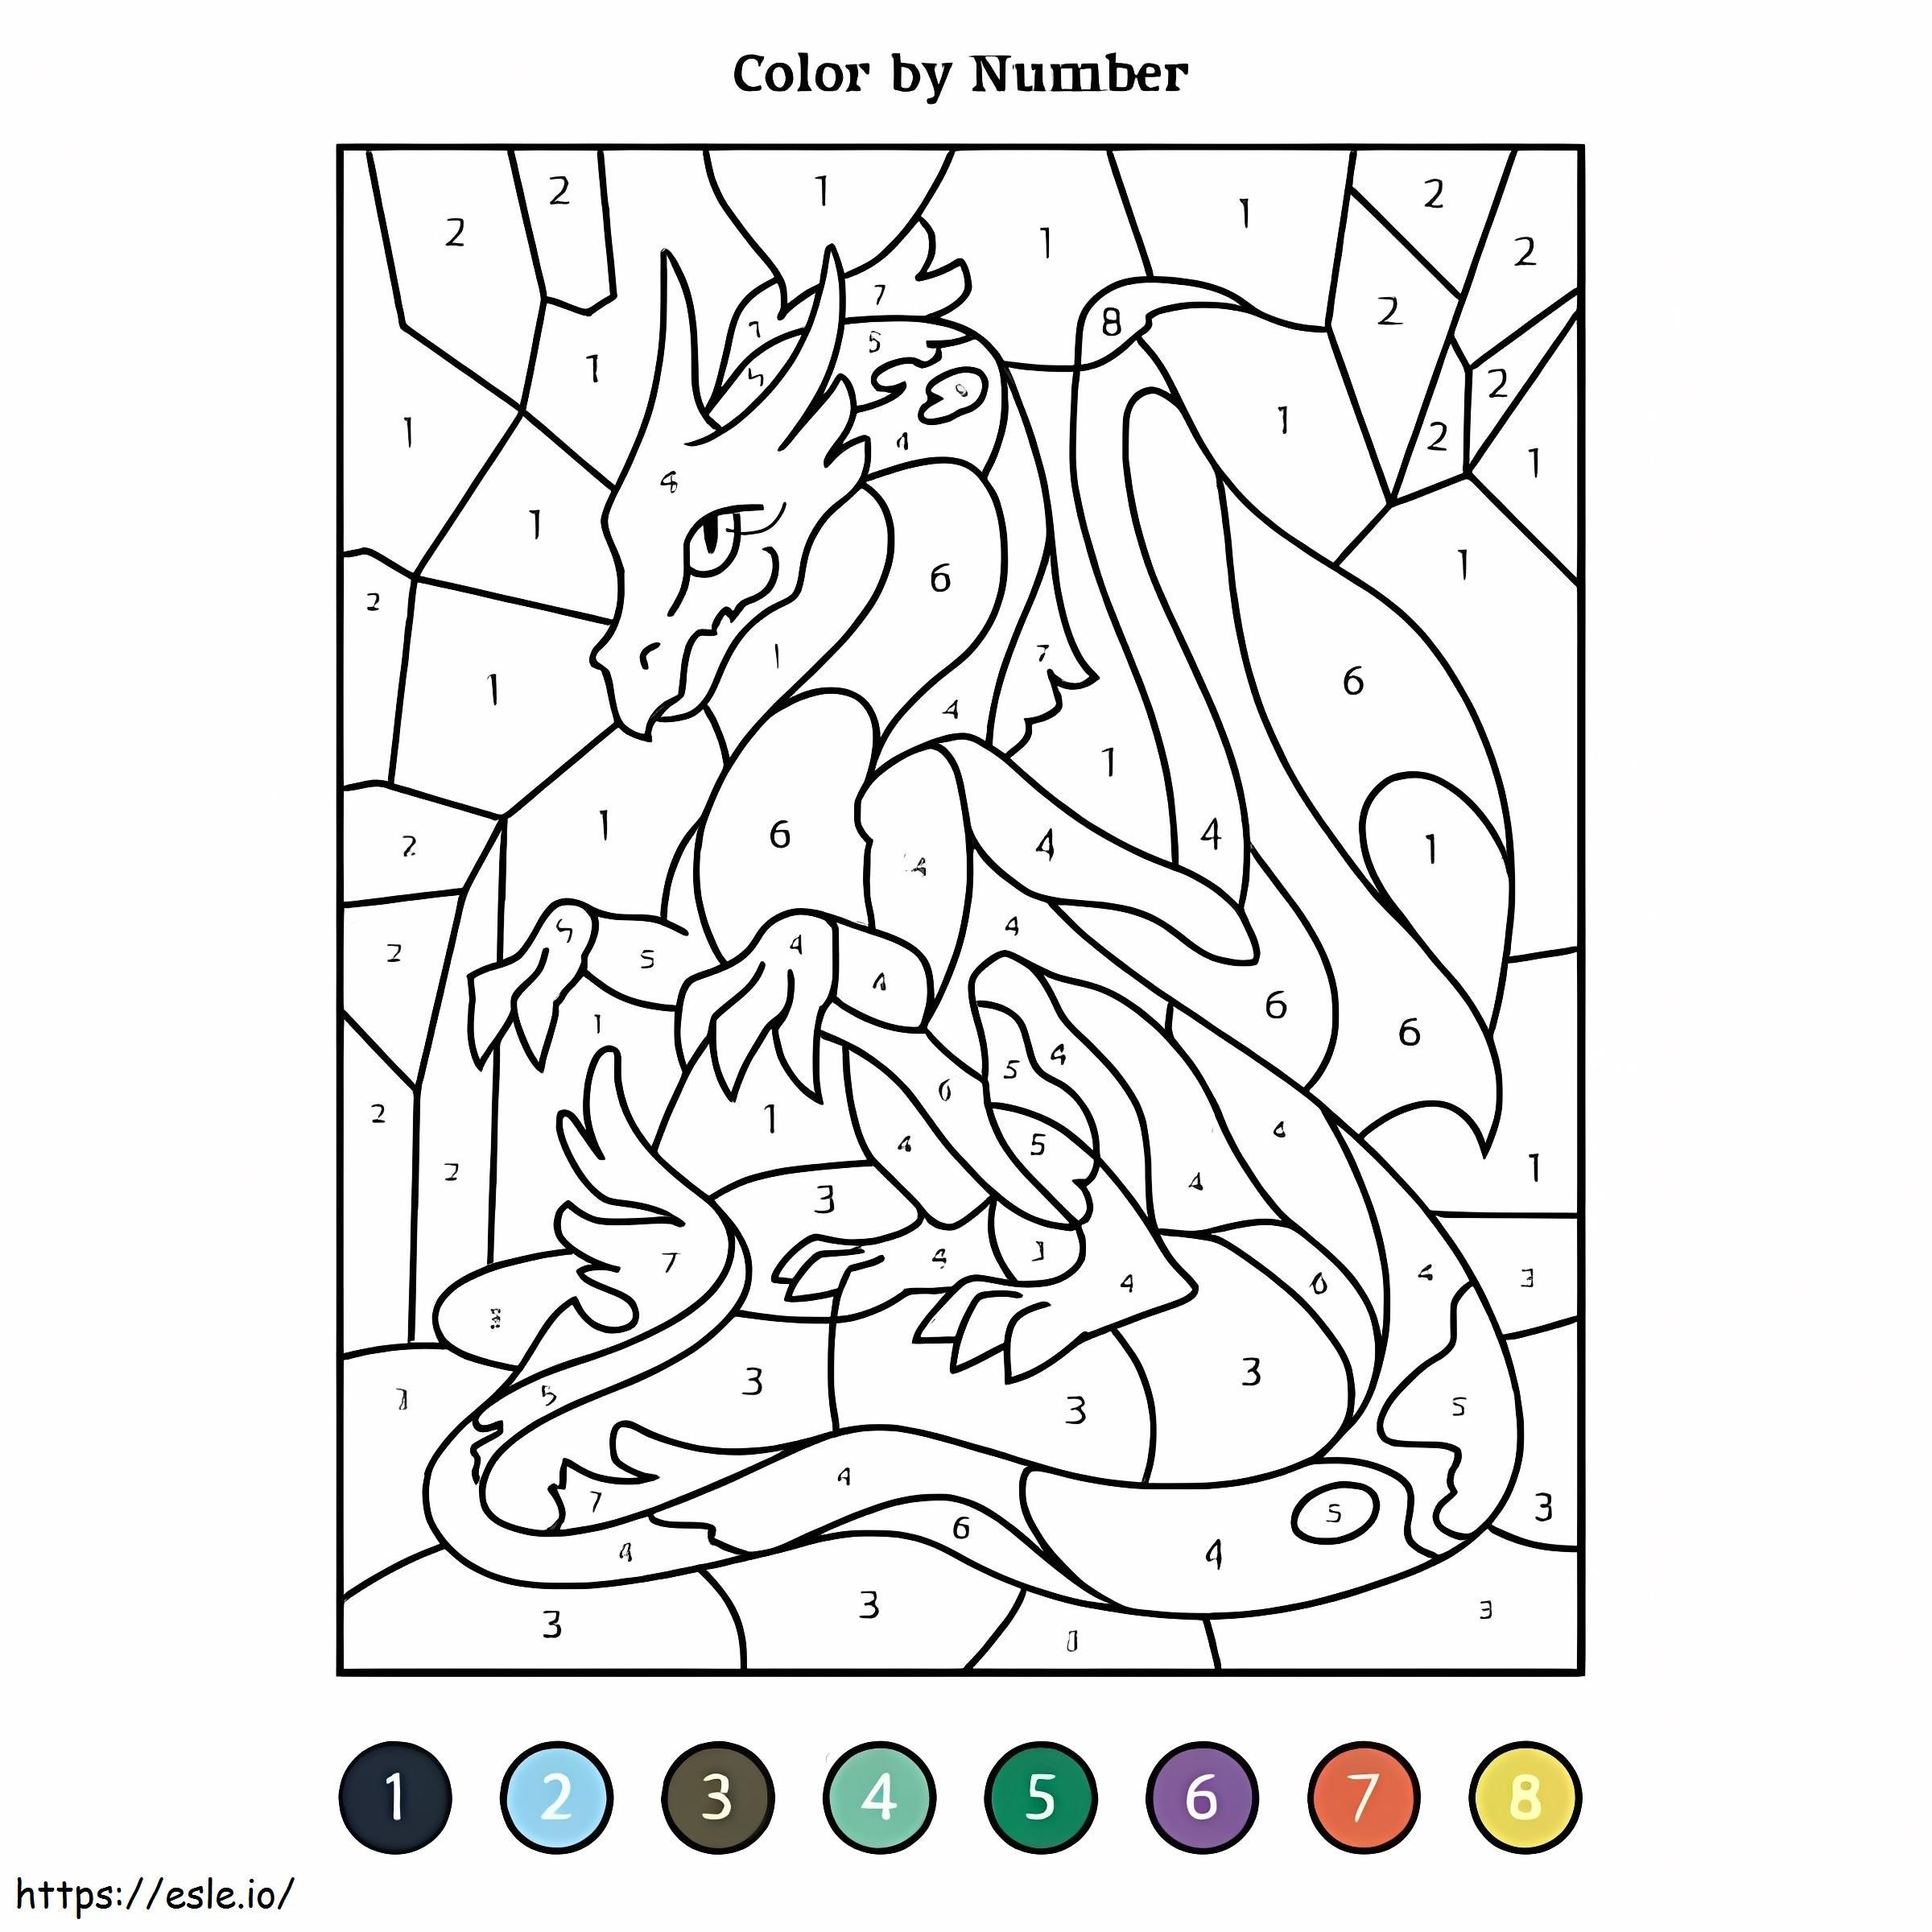 Cool Dragon Color By Number coloring page